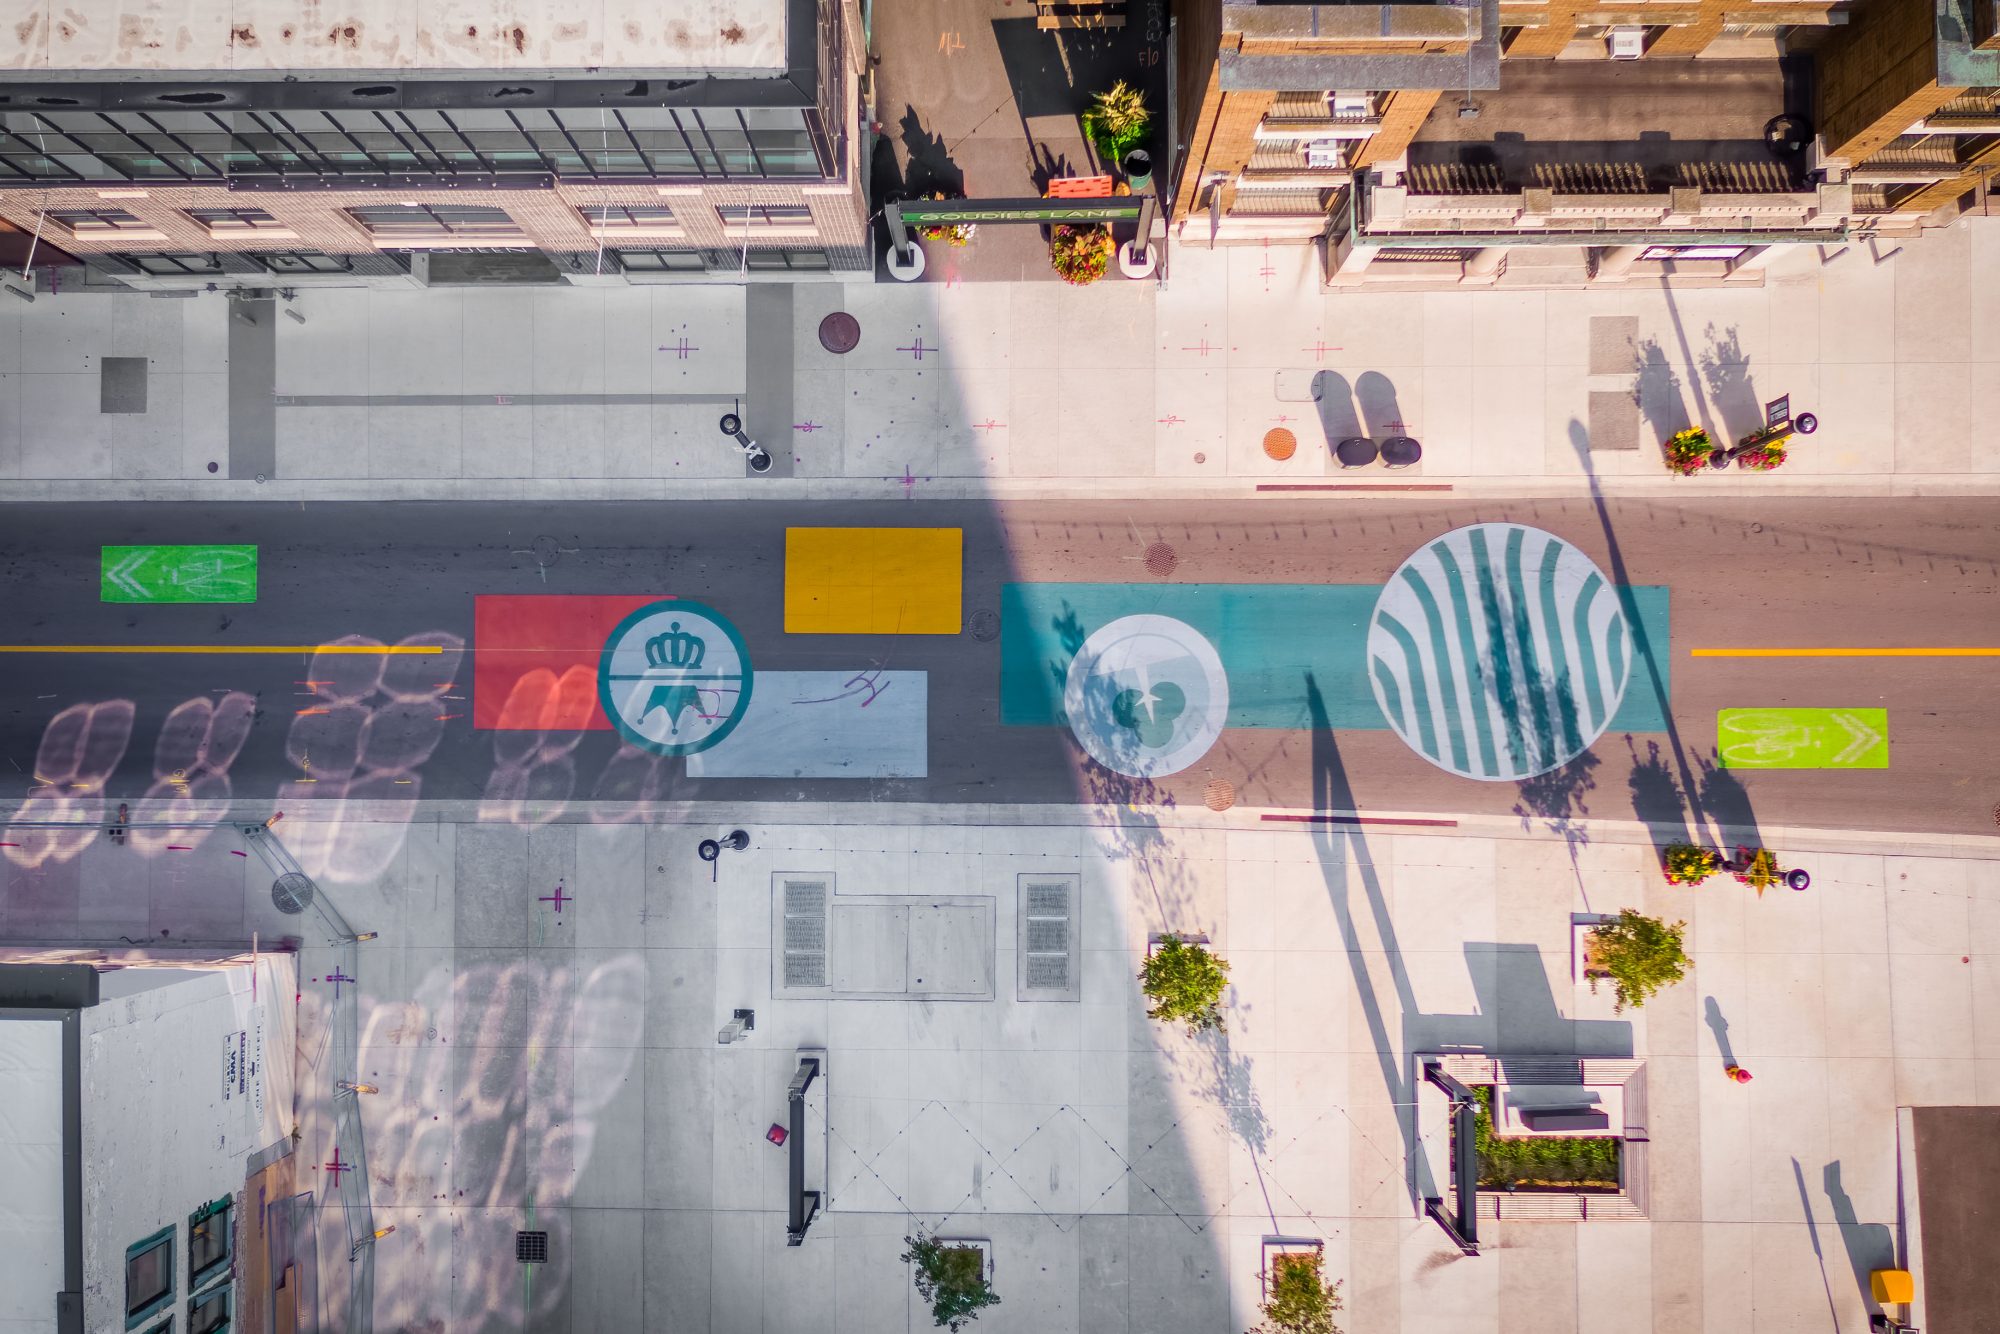 Aerial view overlooking intersection with colorful bold ground surface treatment.